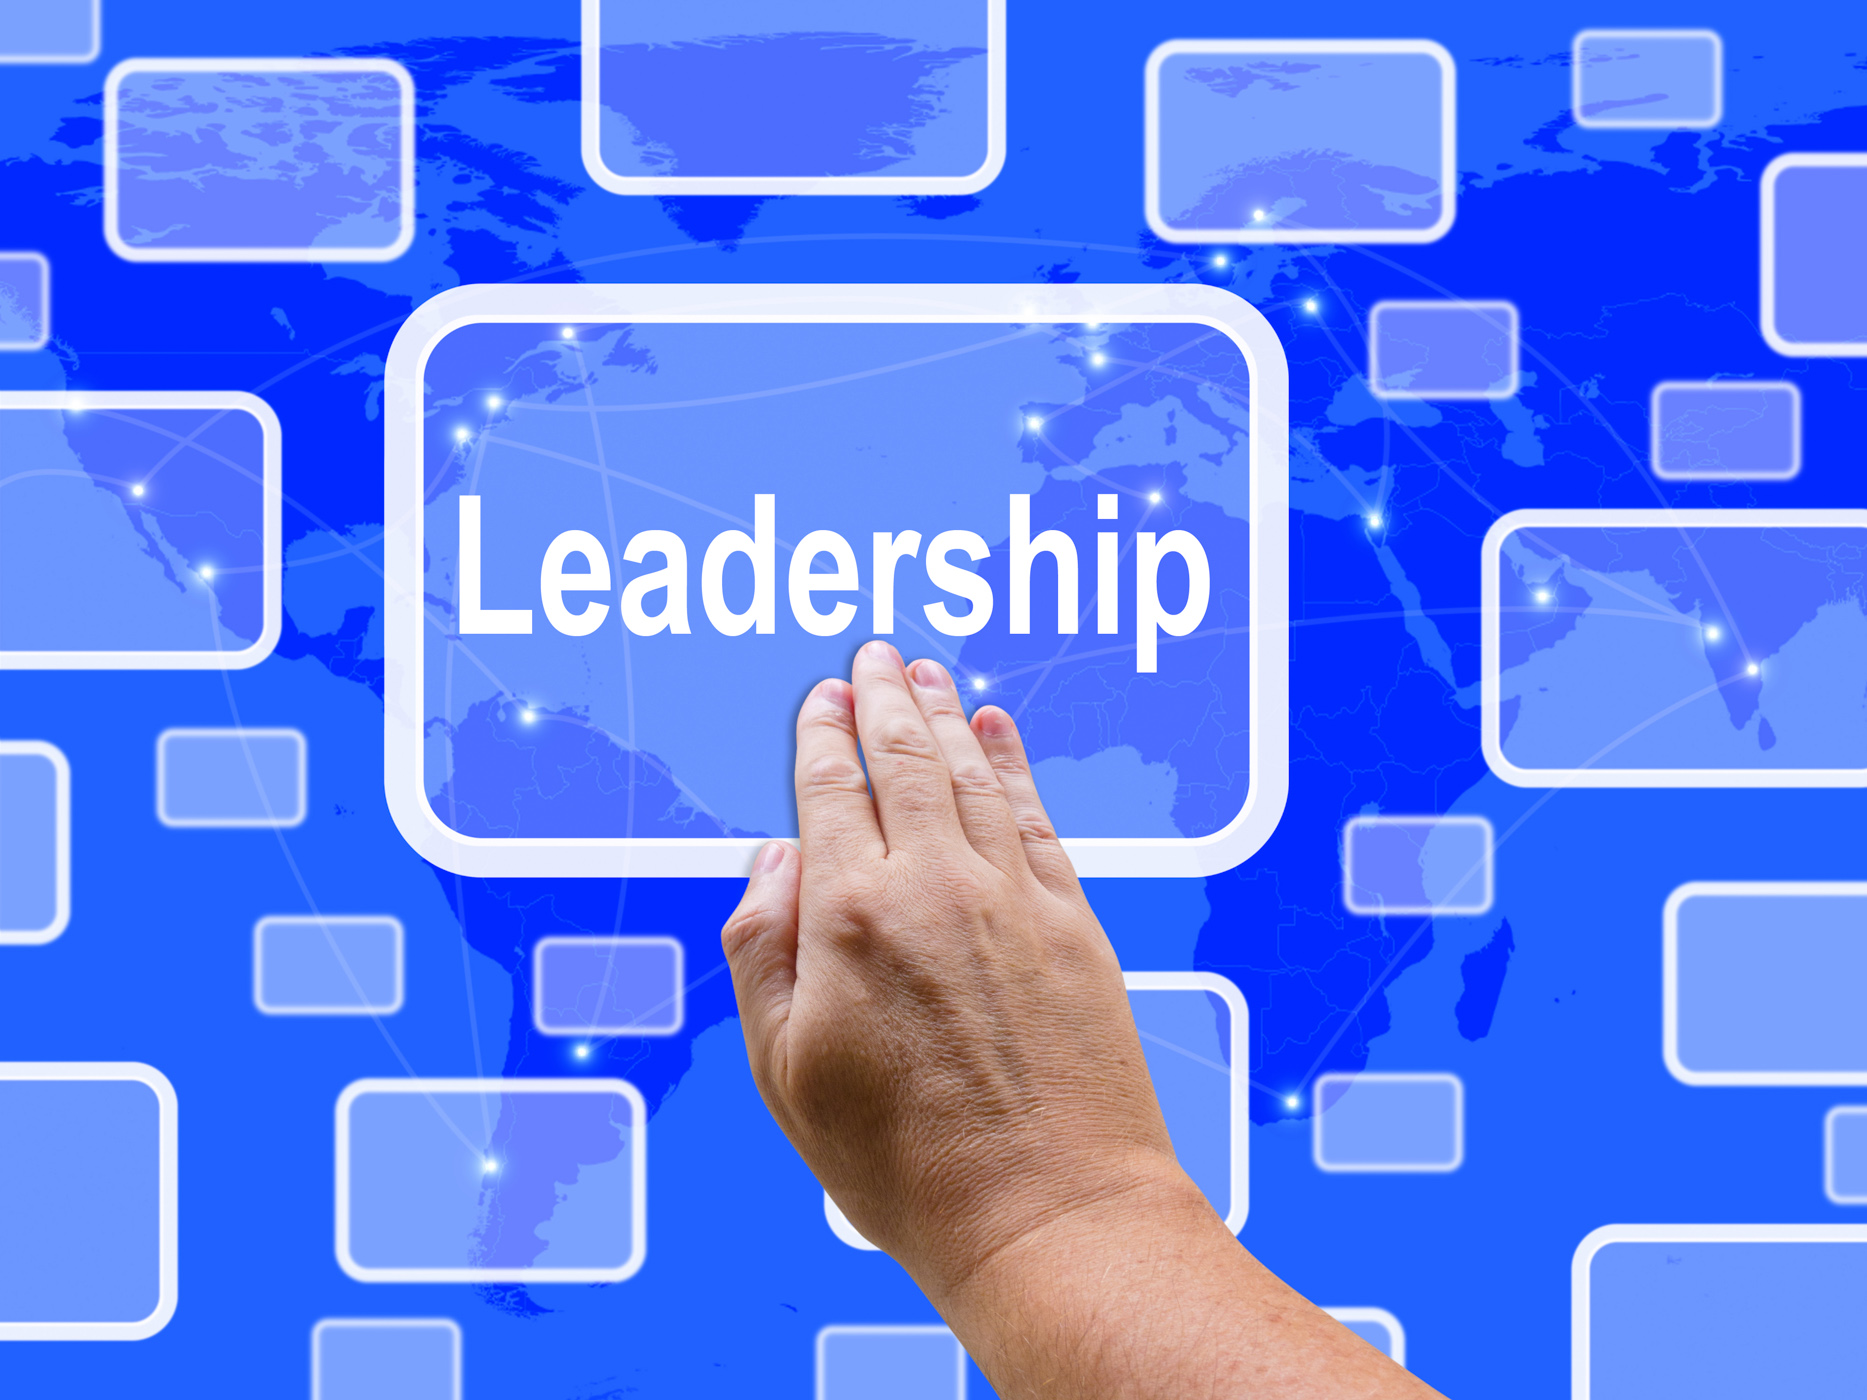 Leadership touch screen shows leader vision achievement photo